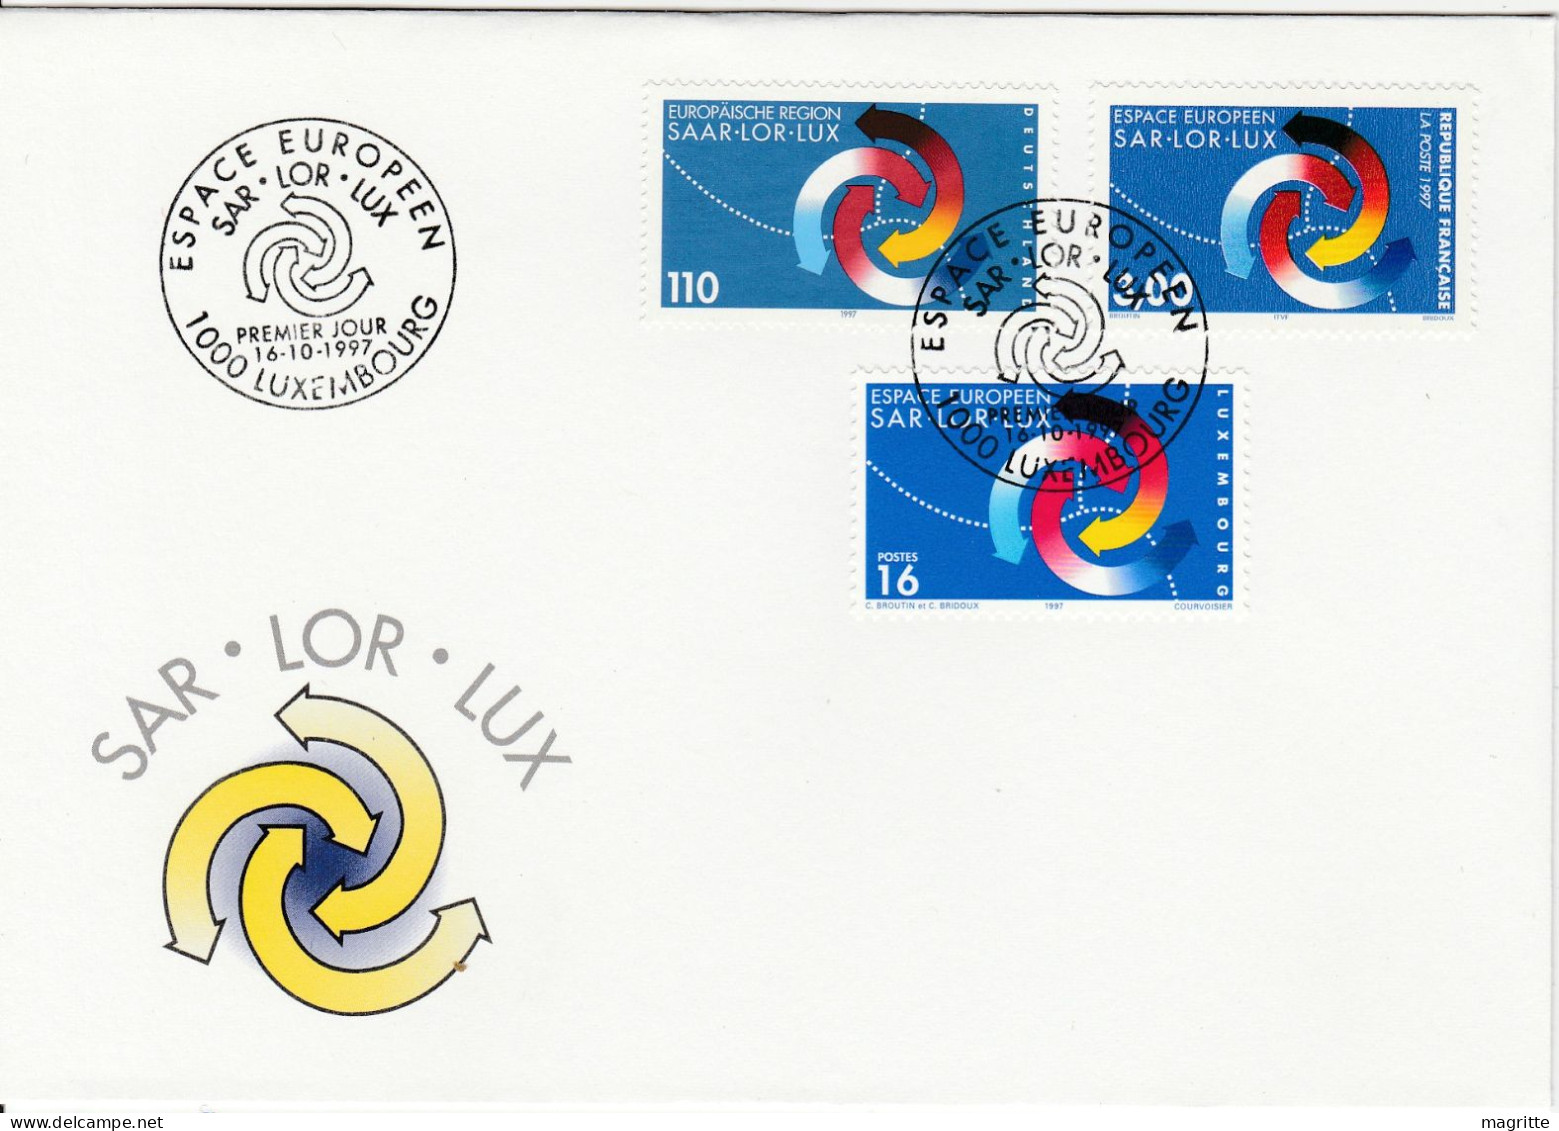 France Allemagne Luxembourg 1997 FDC Mixte Emission Commune Sar-Lor-Lux Germany Luxembourg Saar Lor Lux Joint Issue - Gezamelijke Uitgaven